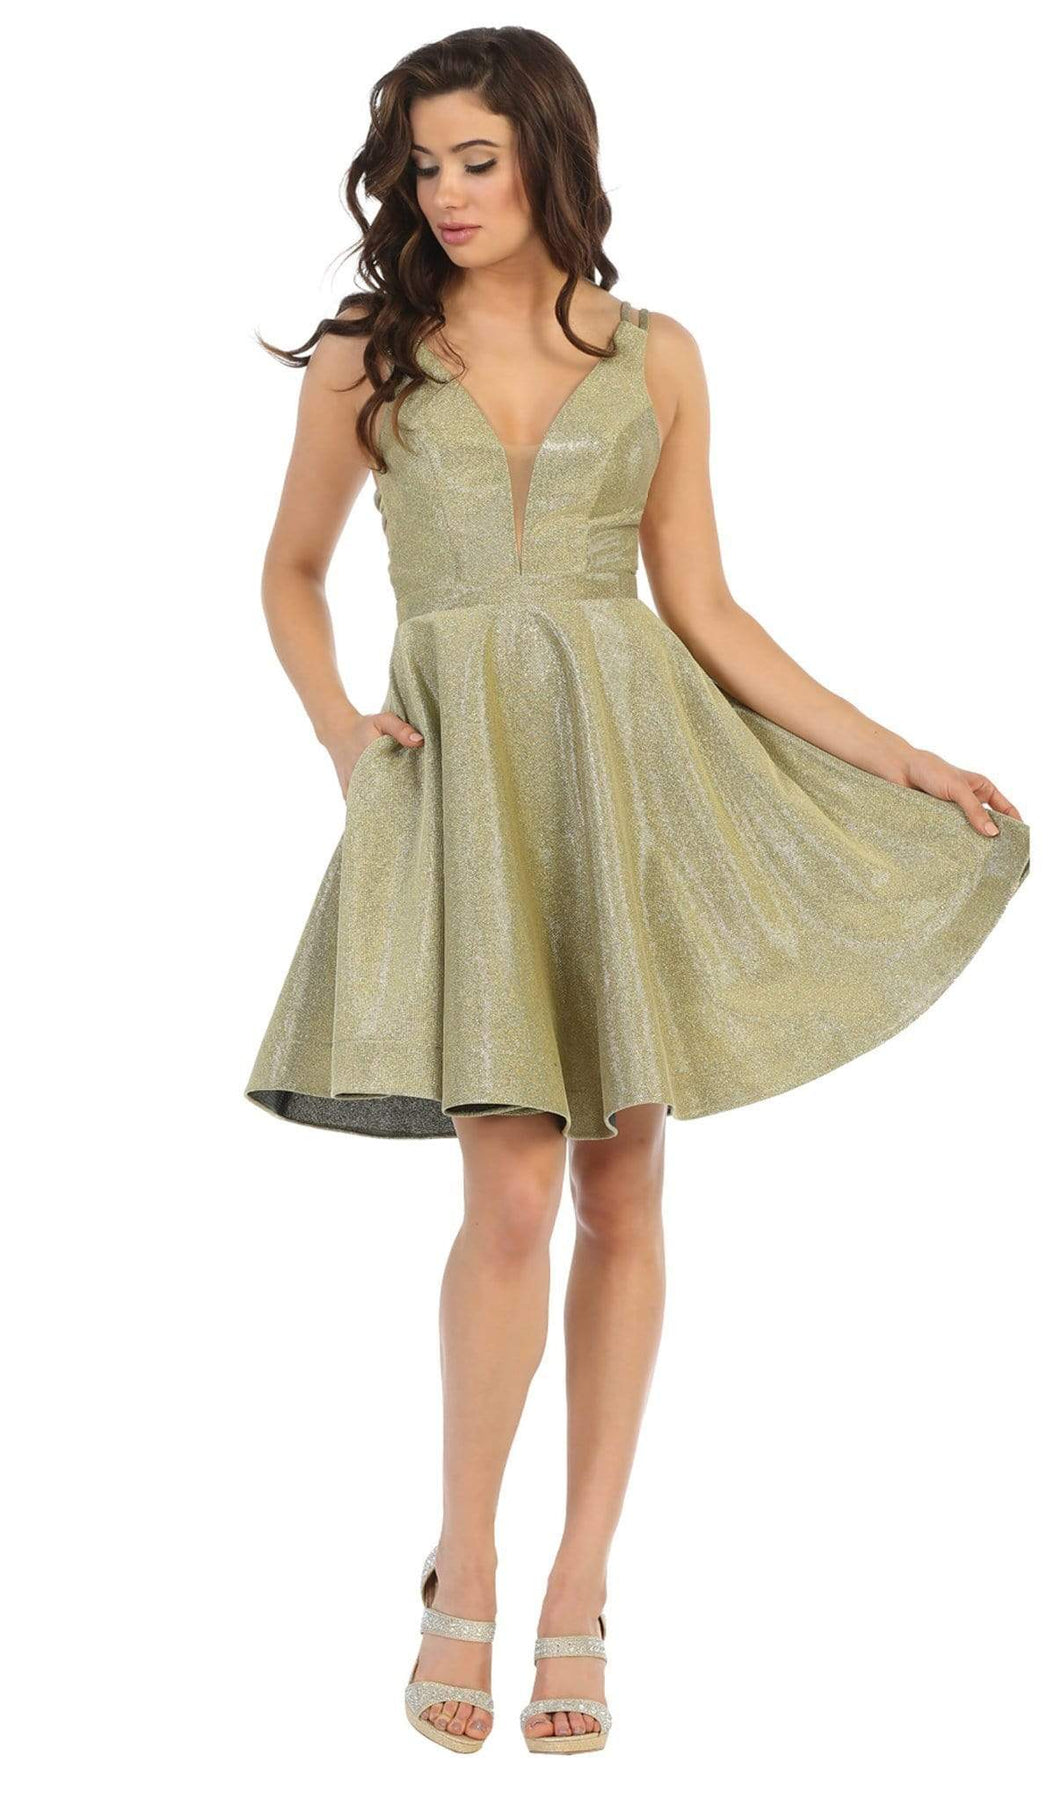 May Queen - RQ7749 Strappy Plunging V-Neck Cocktail Dress Cocktail Dresses 2 / Gold